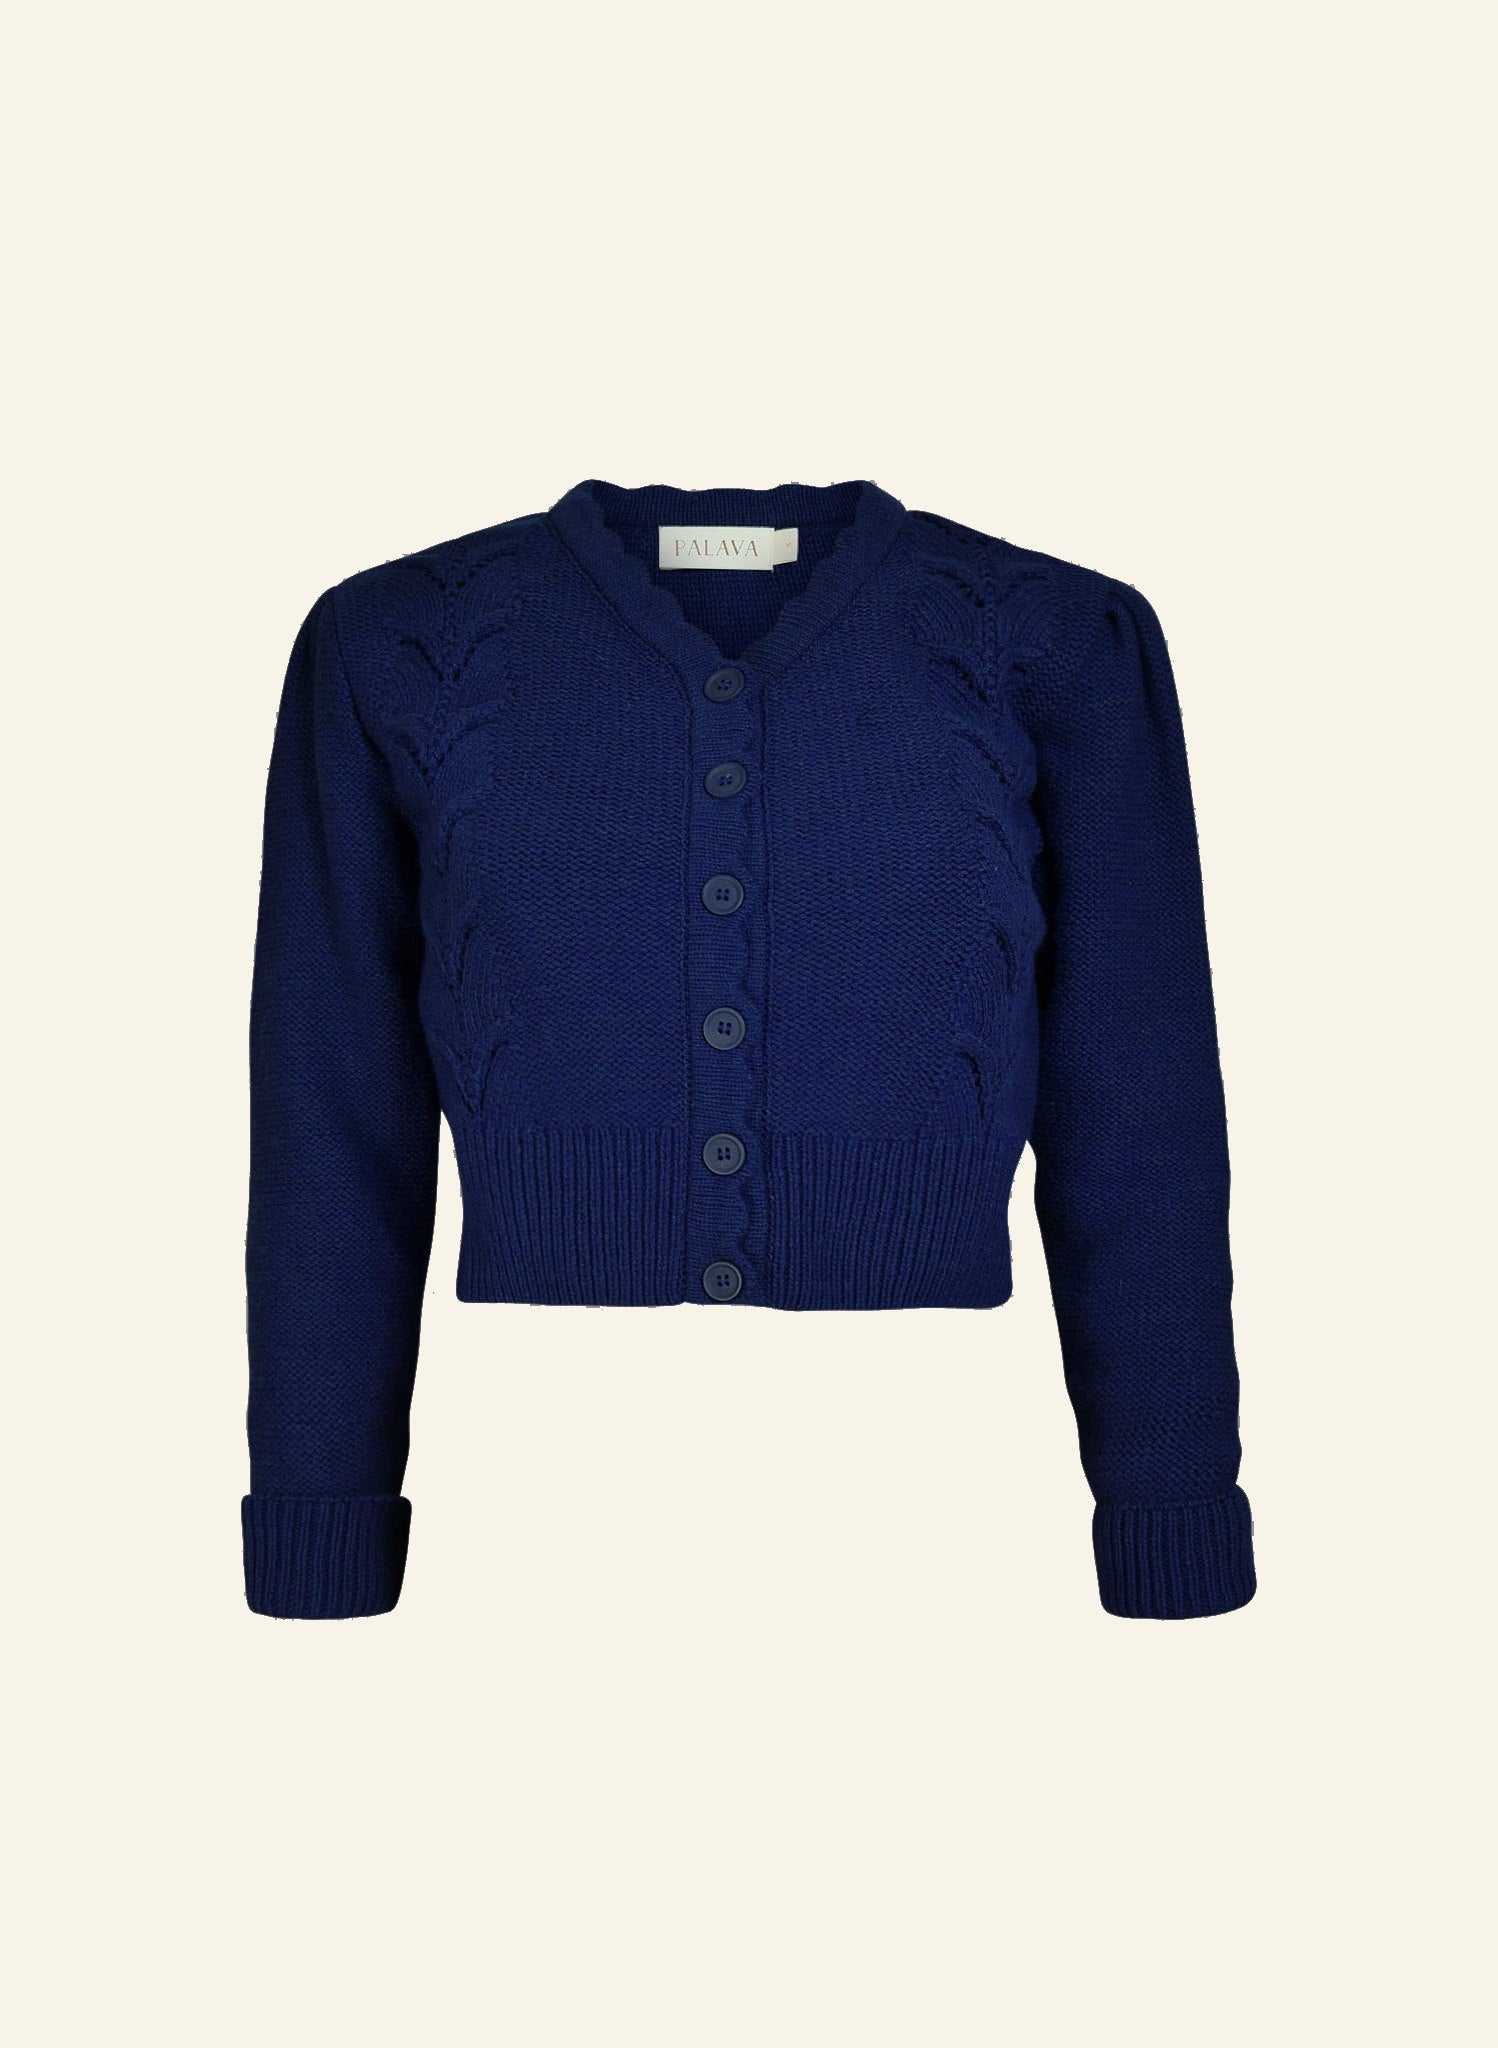 Leah Winter - Navy Vine Knitted Cardigan